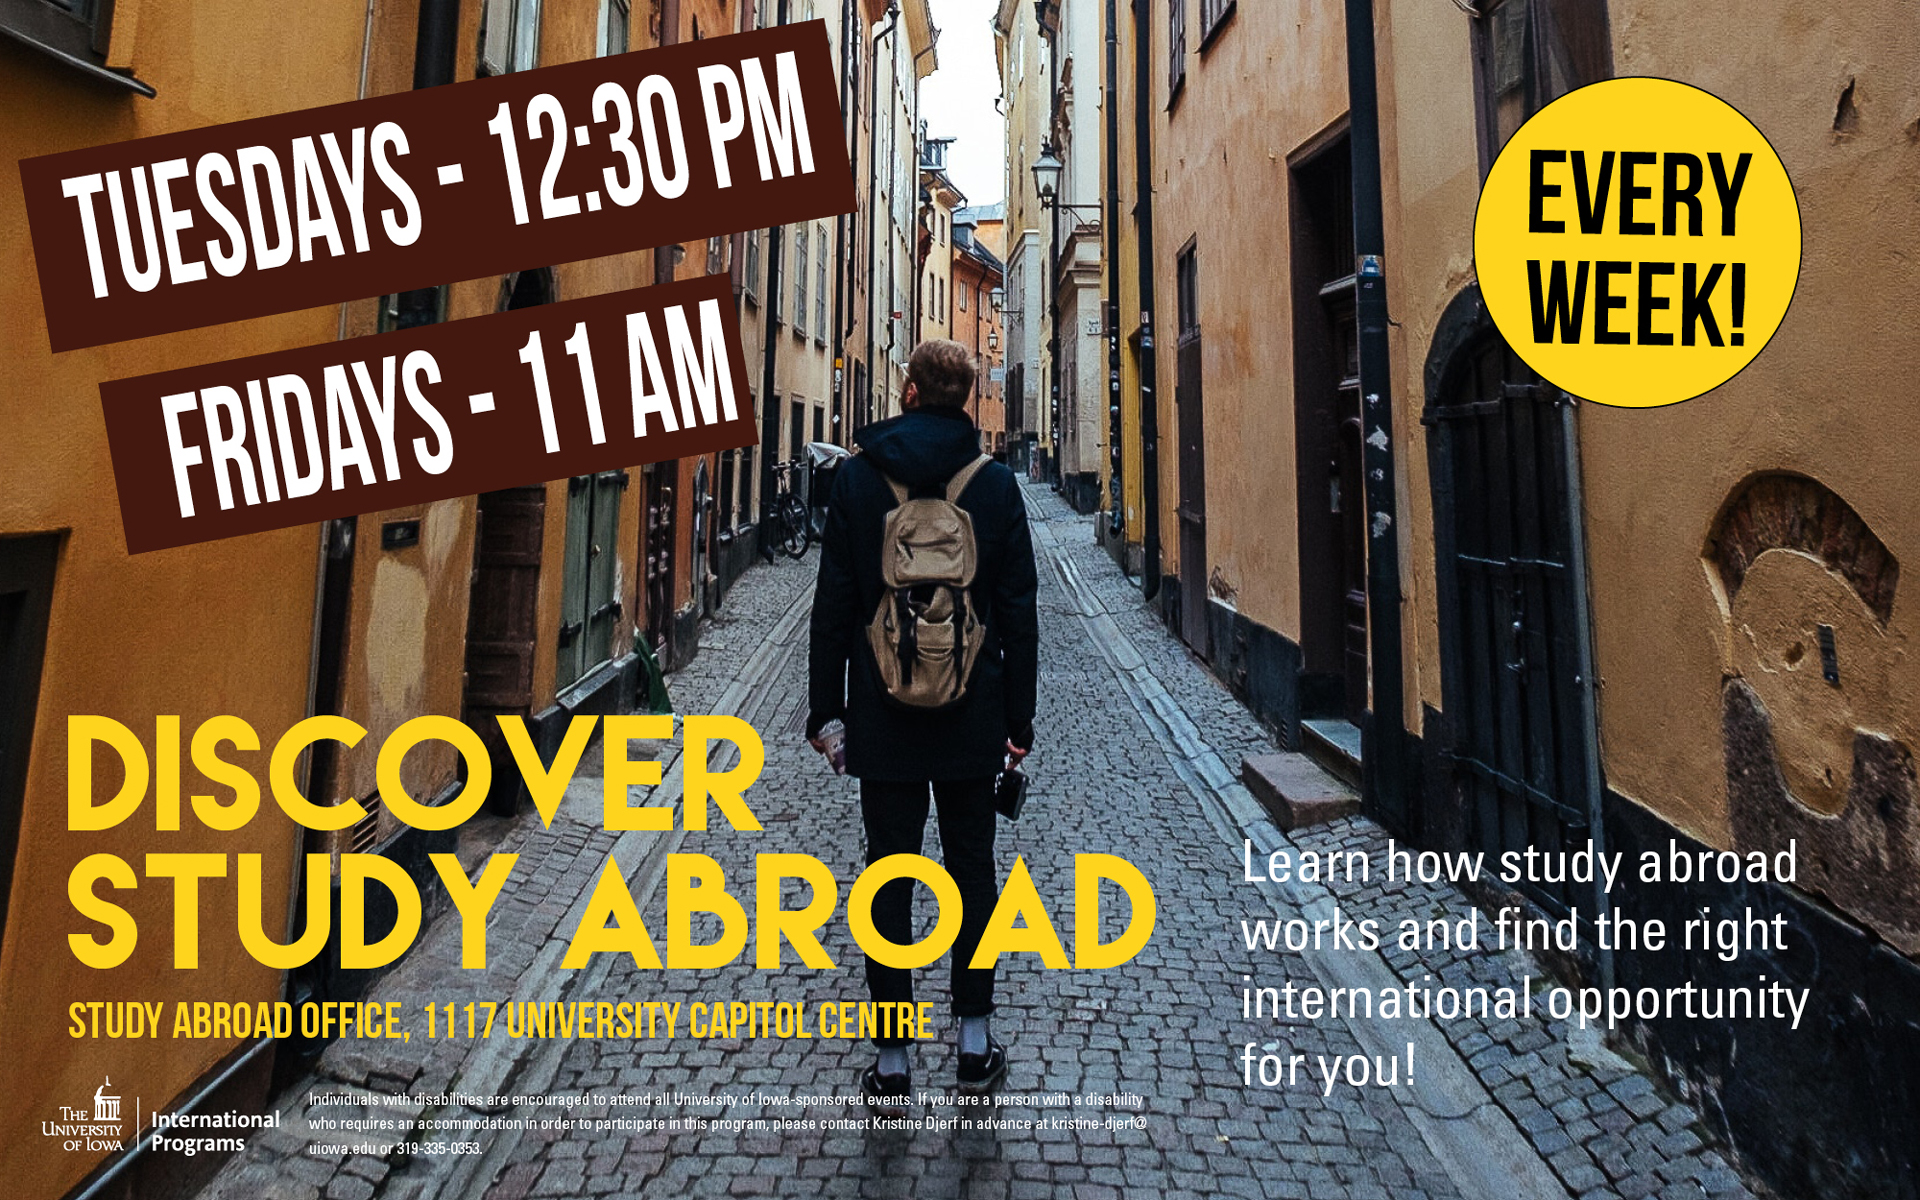 Discover Study abroad Tuesdays - 12:30 and Fridays - 11 am Learn how to study abroad every week!